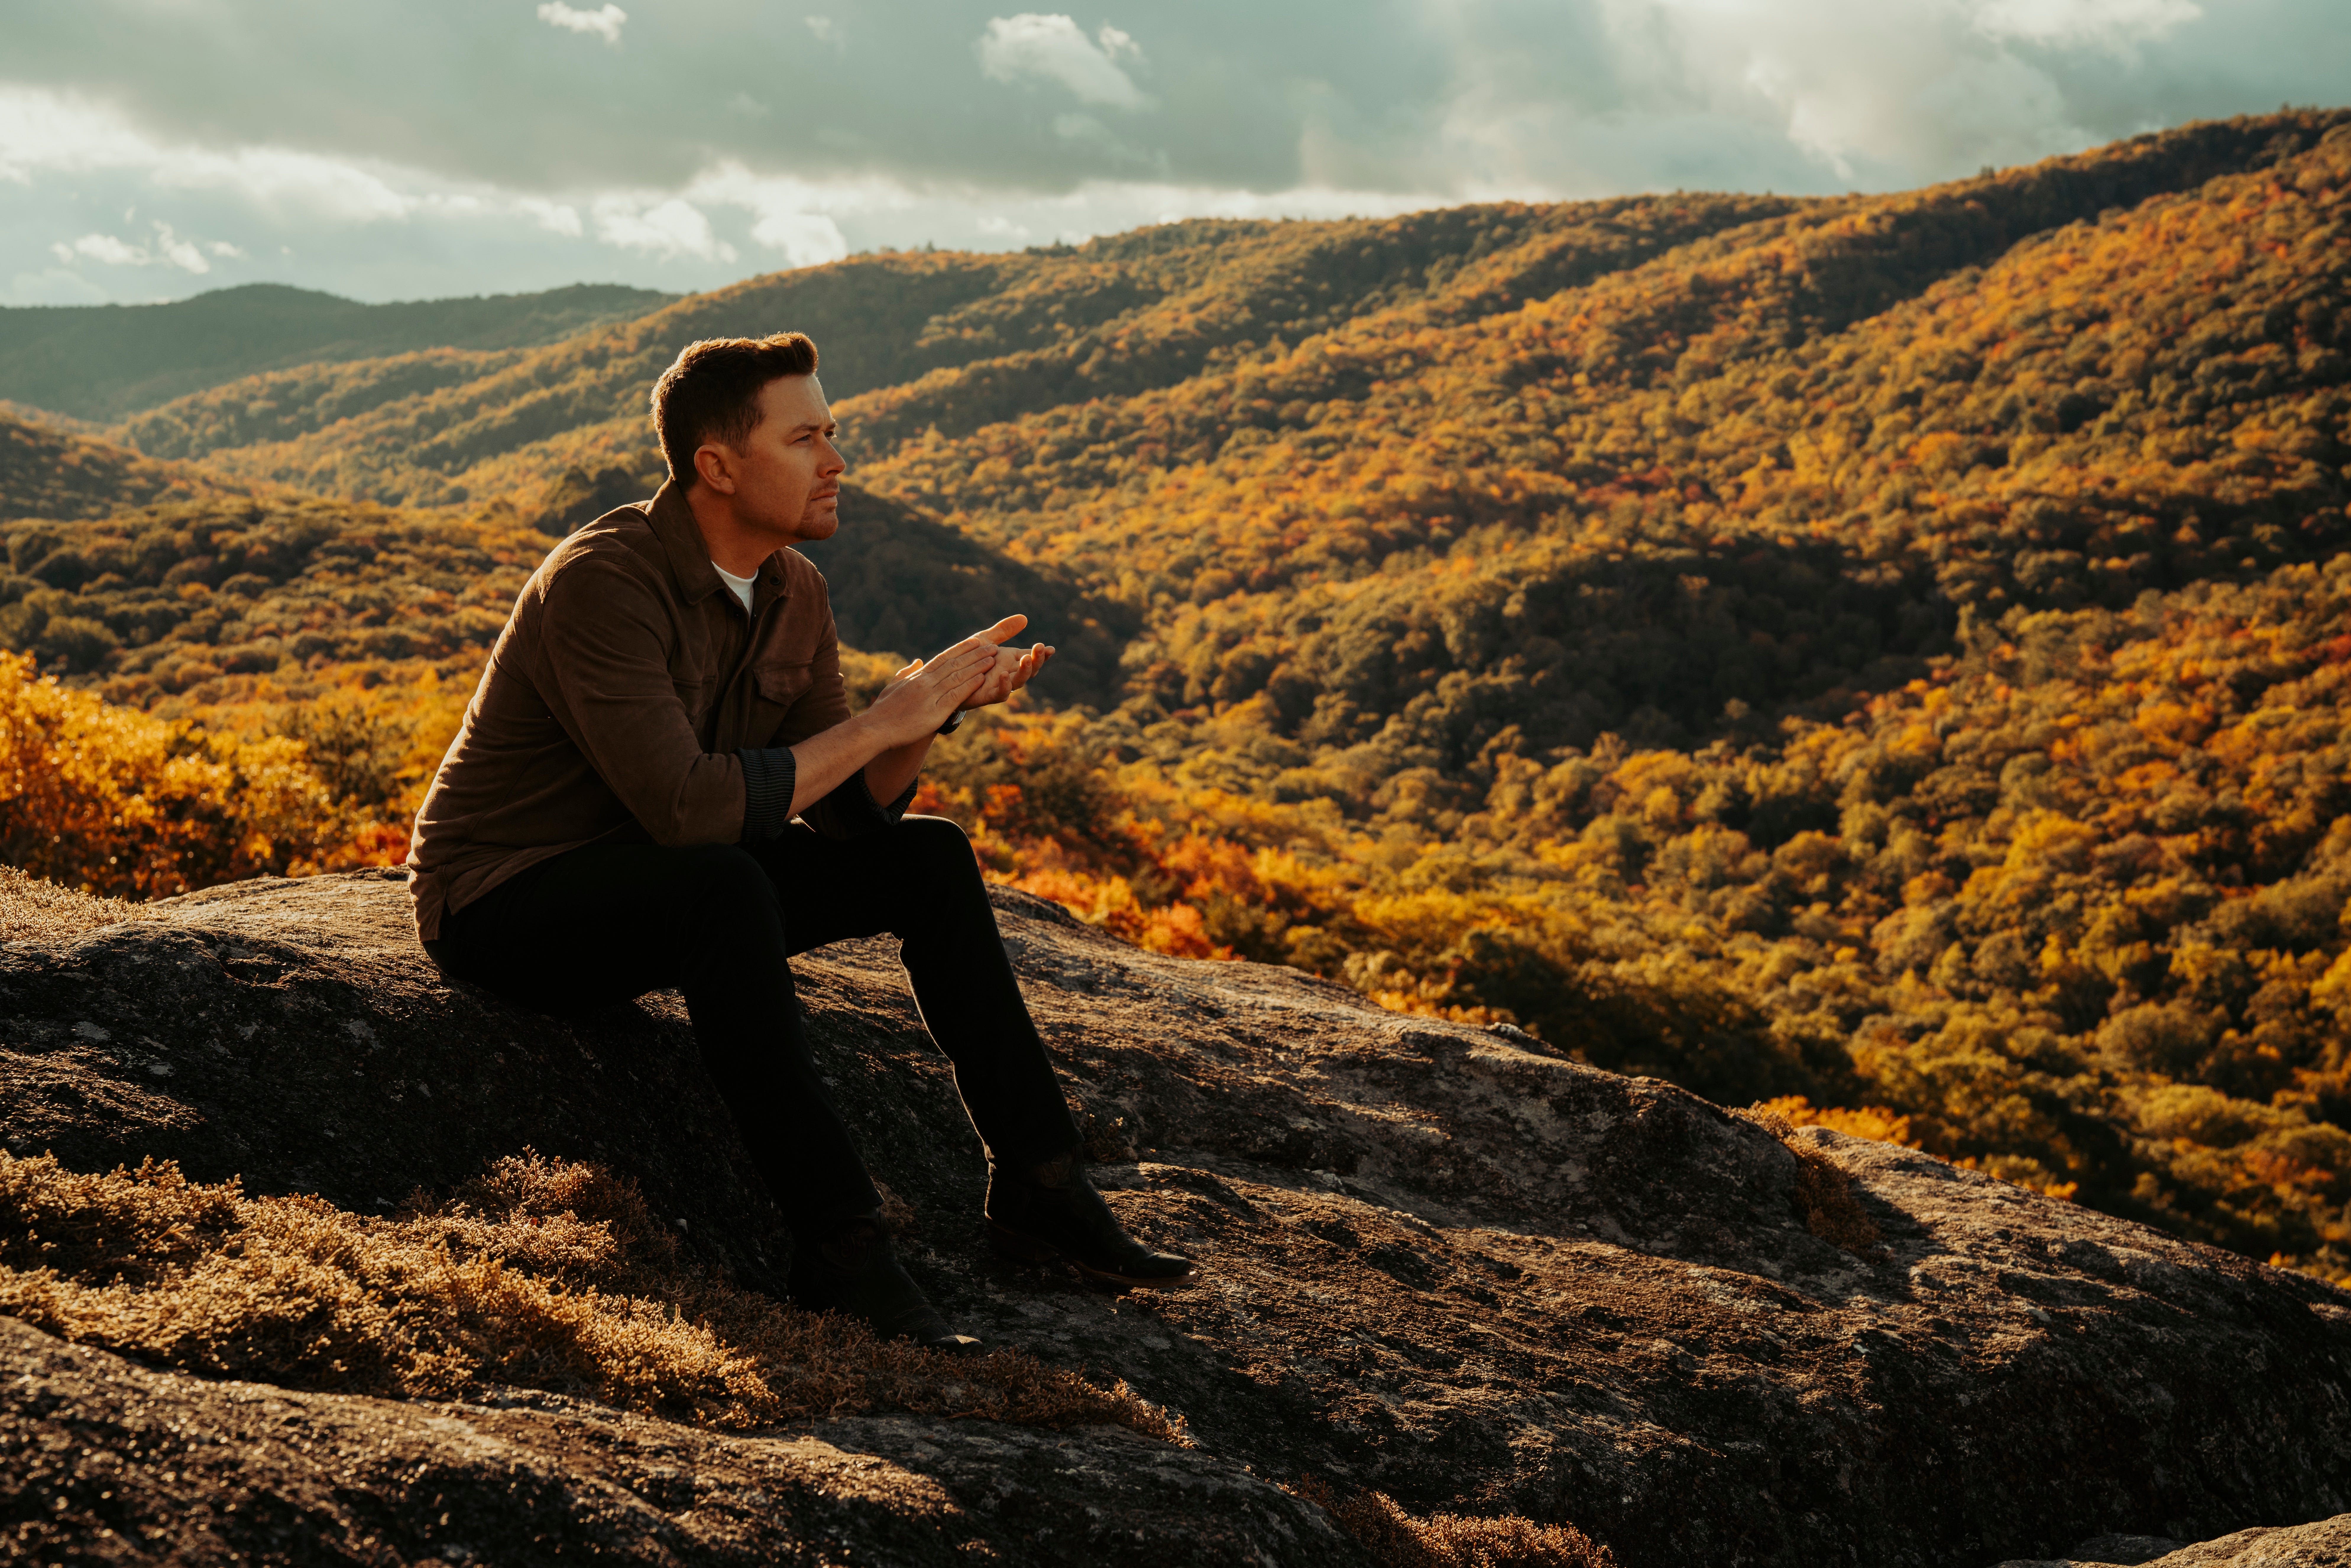 Scotty McCreery's 'Rise and Fall' redefines his love of country music's traditions